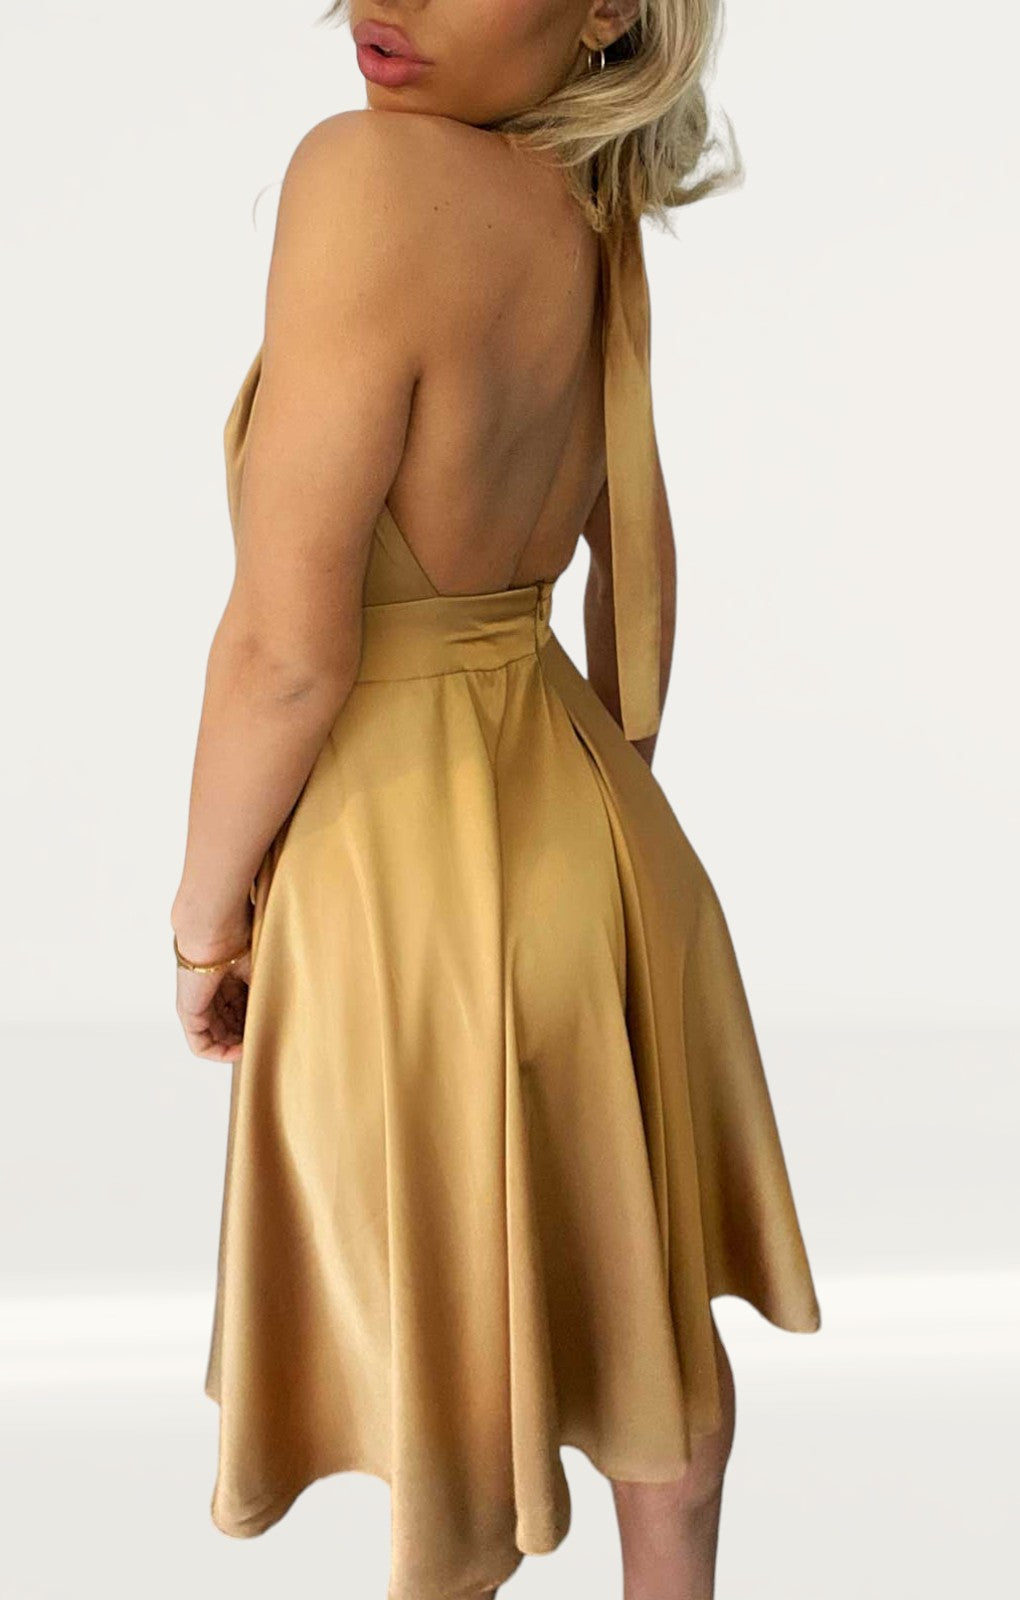 House of Zana Marilyn in Gold Dress product image